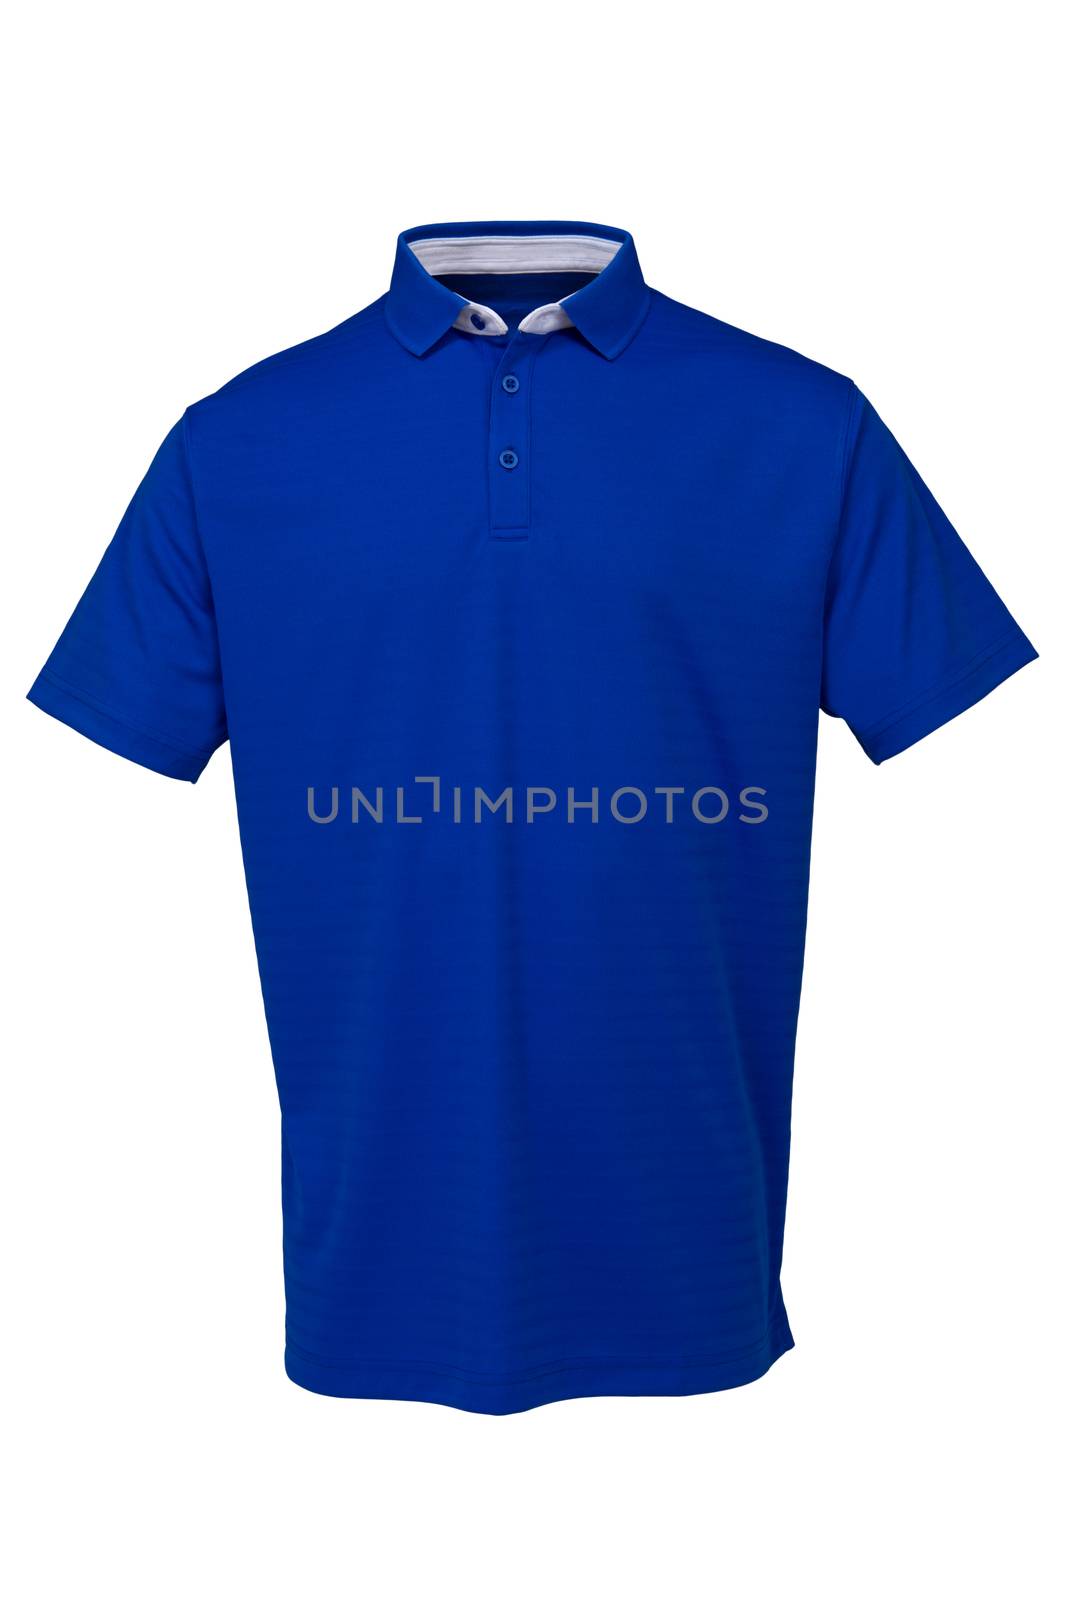 Blue golf tee shirt for man or woman on white background